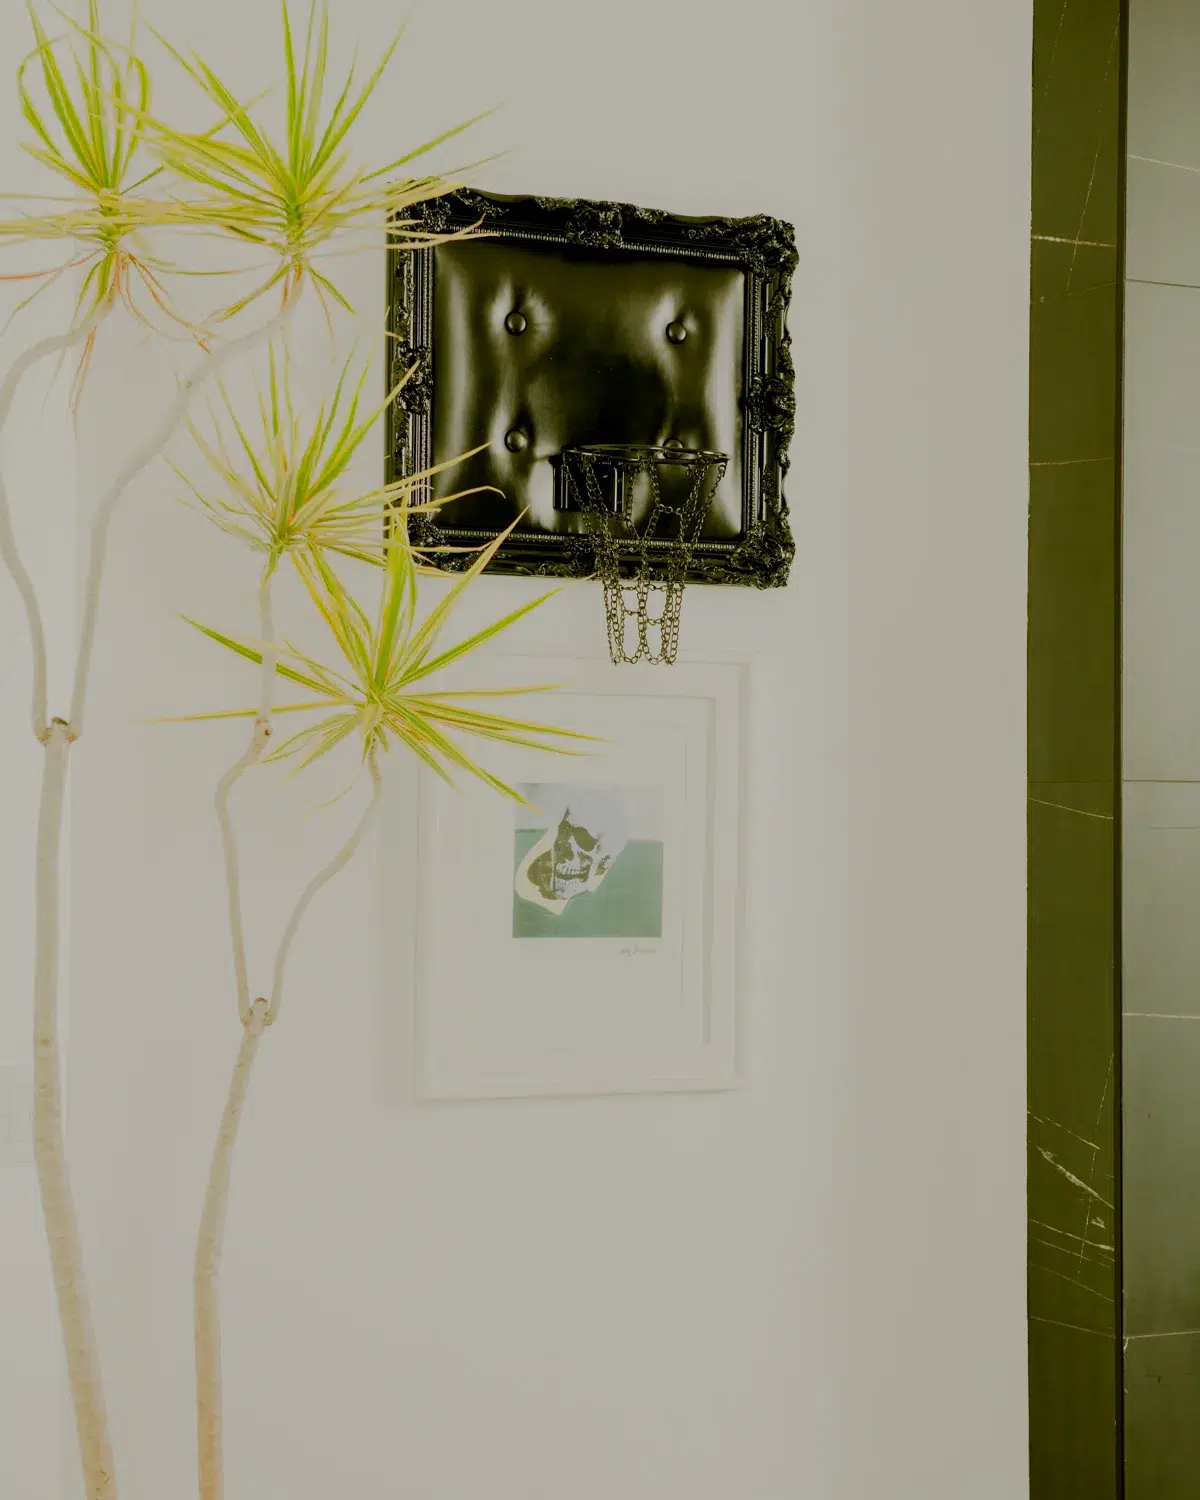 A bathroom accessory featuring a black leather hoop adorned with a plant.